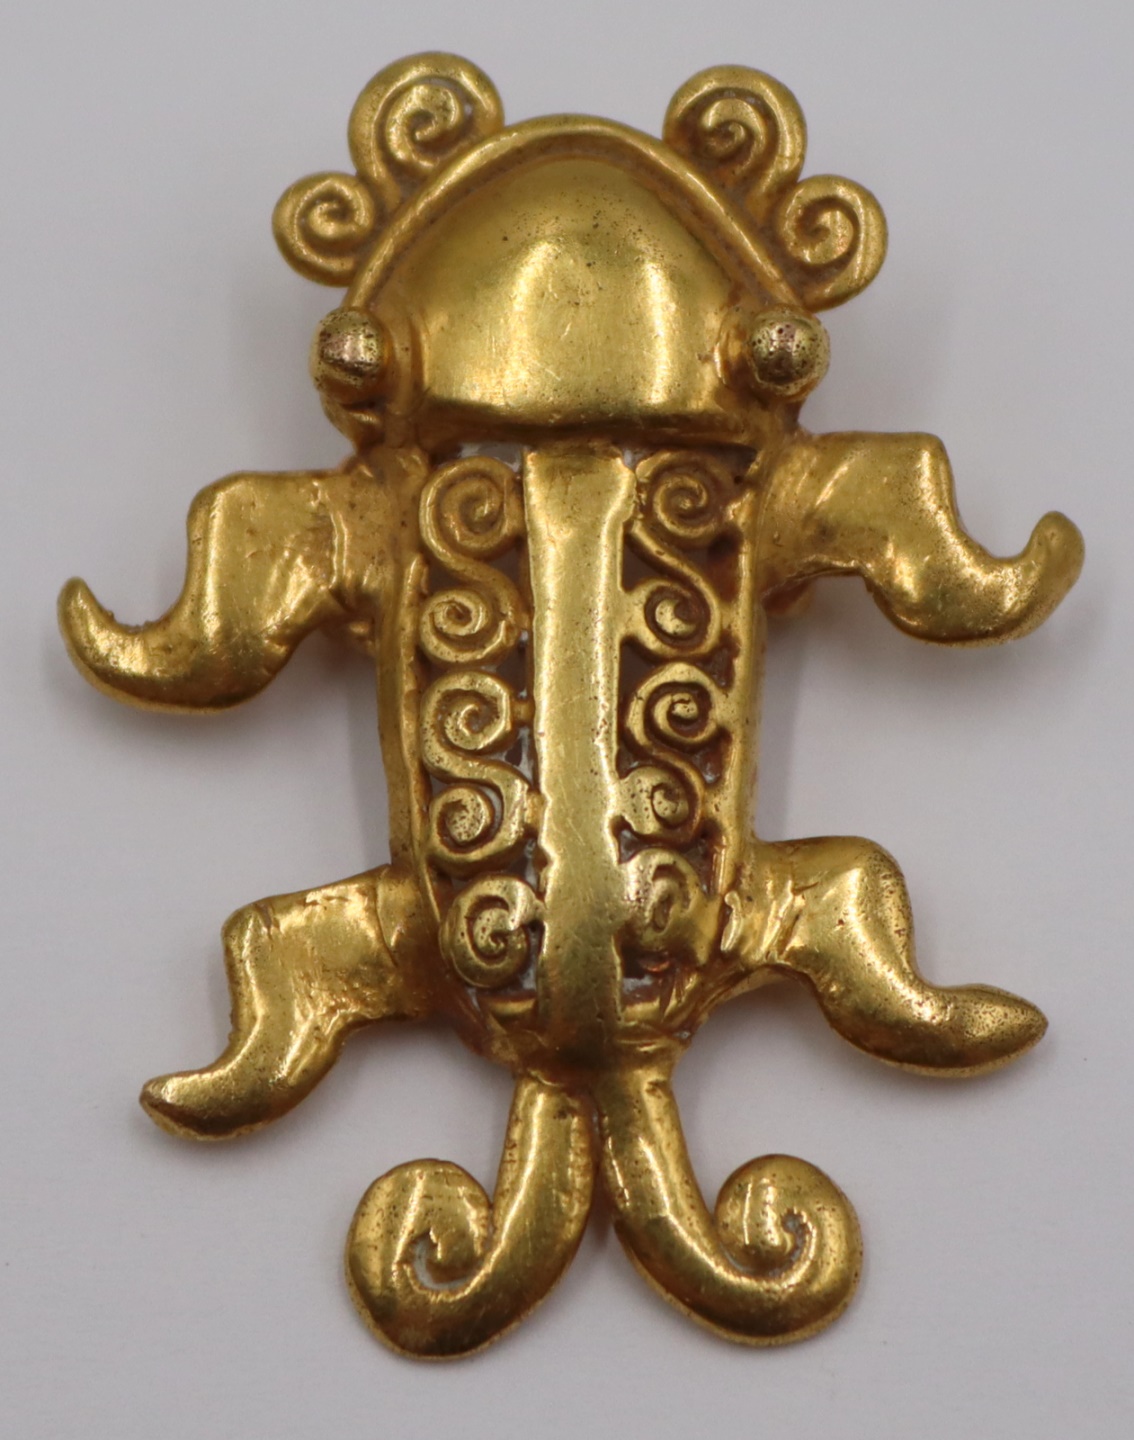 JEWELRY 18KT INCAN GOLD FIGURAL 3bd7be